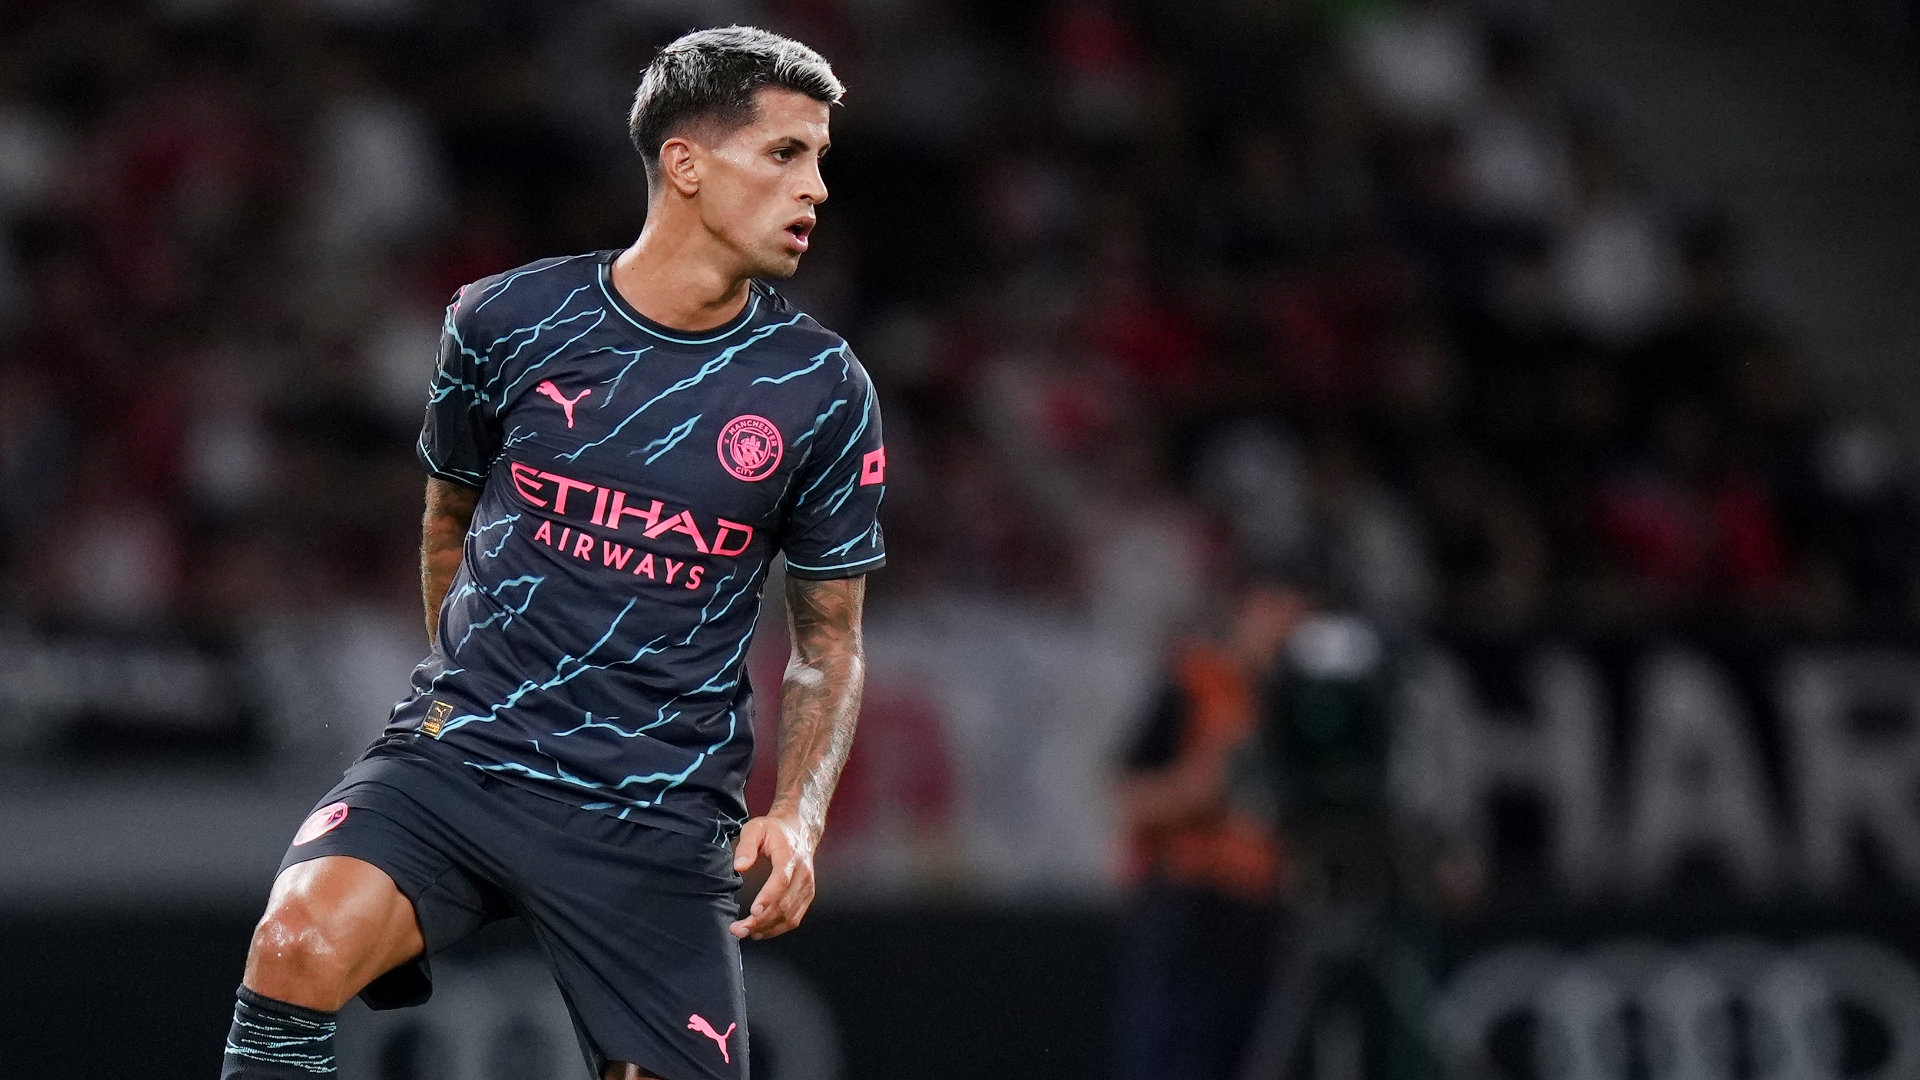 Can Joao Cancelo rejuvenate his career with Barcelona? - Stream the Video